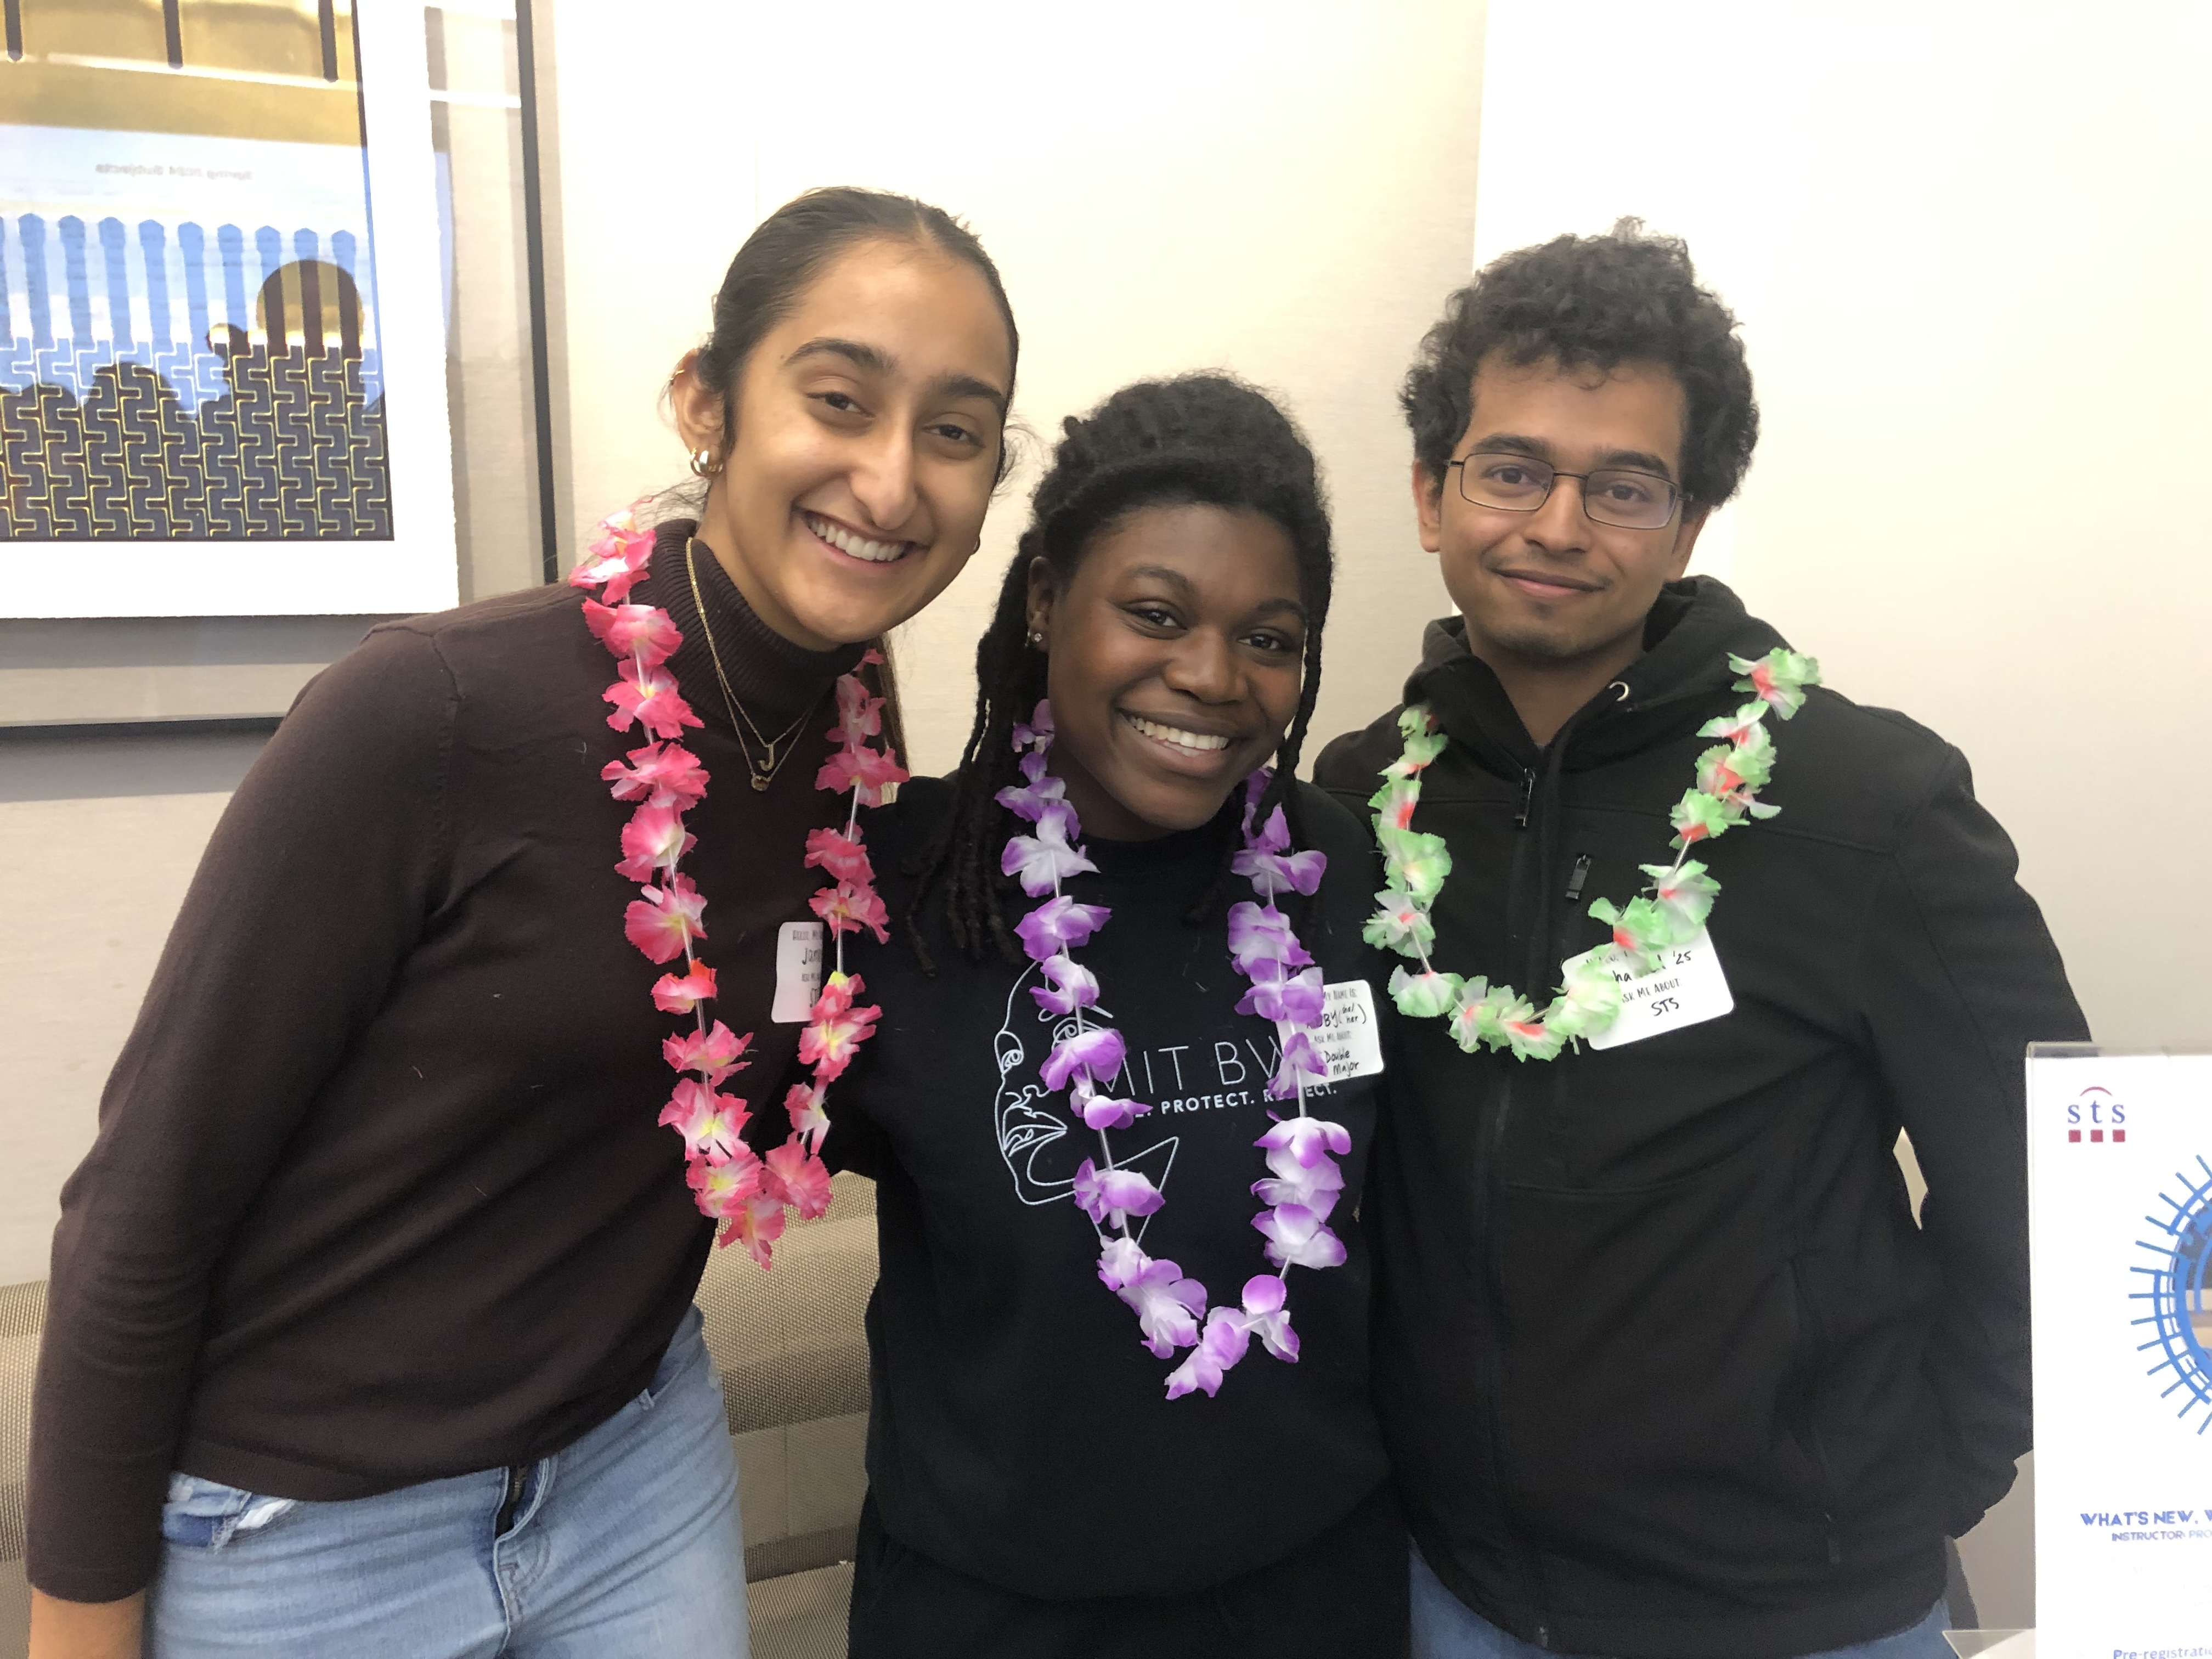 Three students in black shirts wear leis and smile during the Spring Ahead with SHASS event